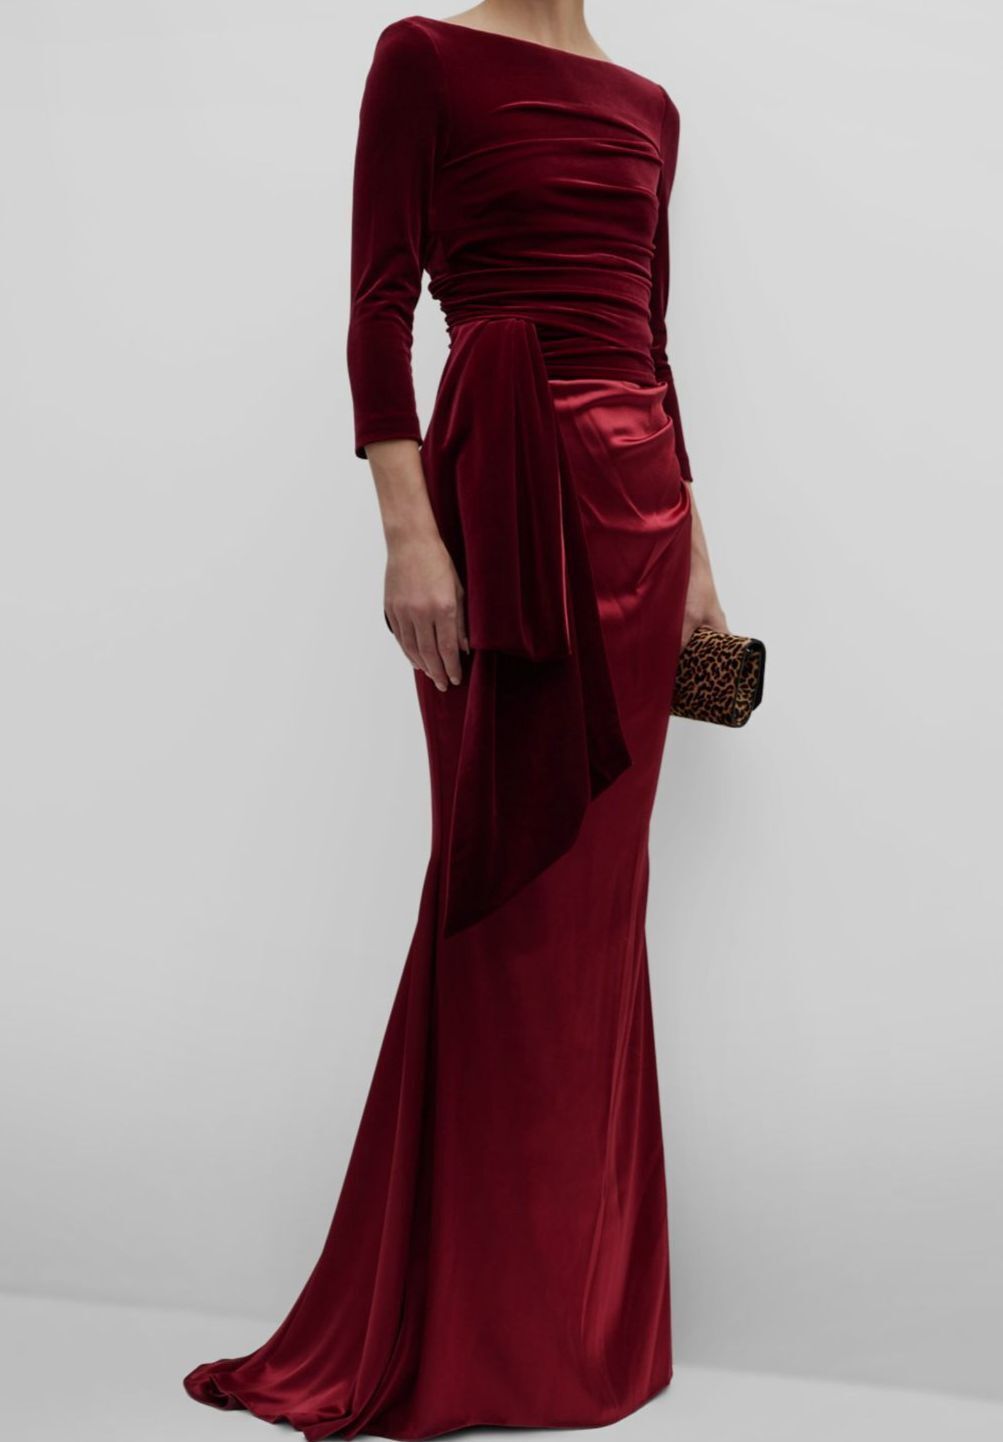 $2495 Talbot Runhof Women's Red Mixed-Media Draped Bow Gown Dress Size ...